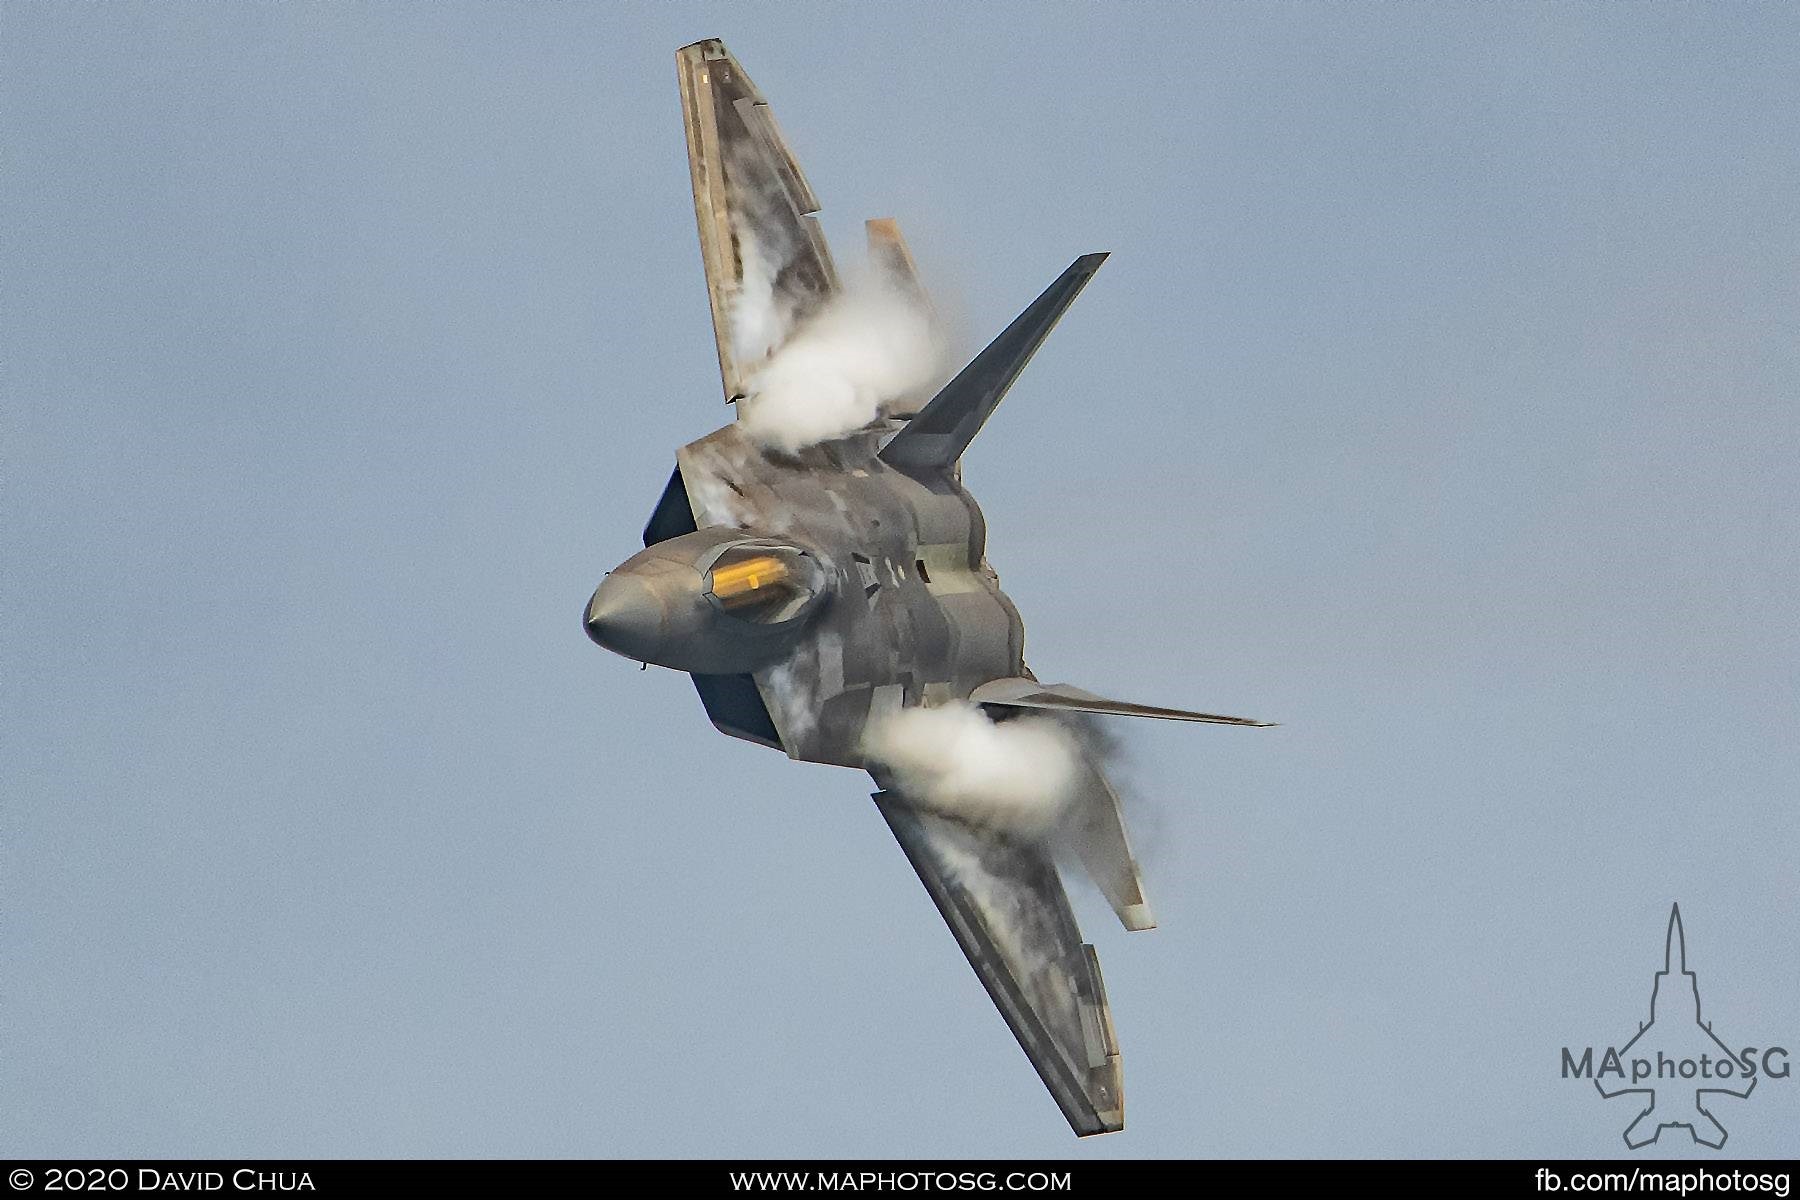 Condensaation forms as the F-22 Raptor turns towards show centre